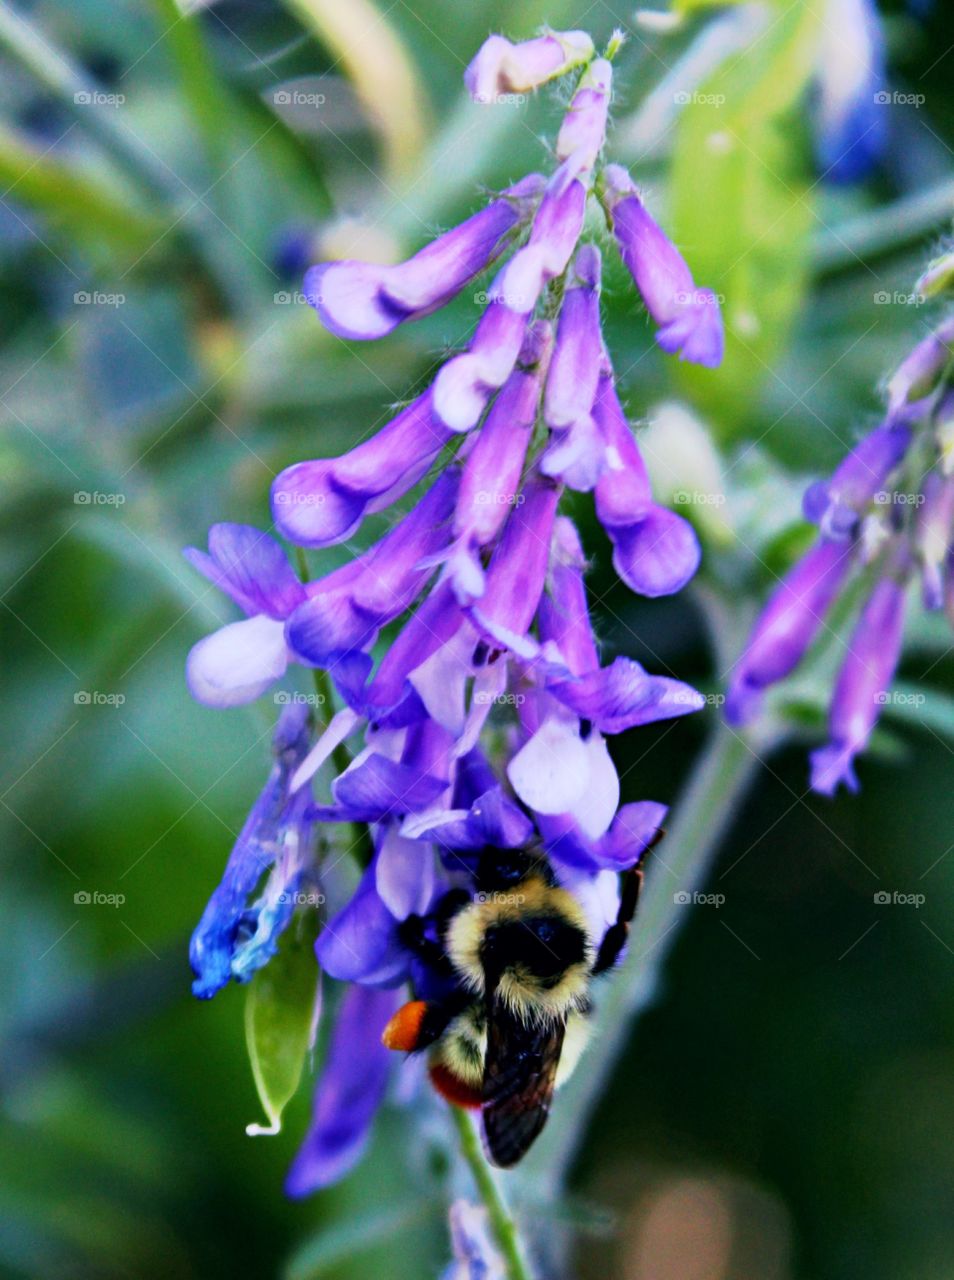 Vicia Villosa visited by a local Bumblebee